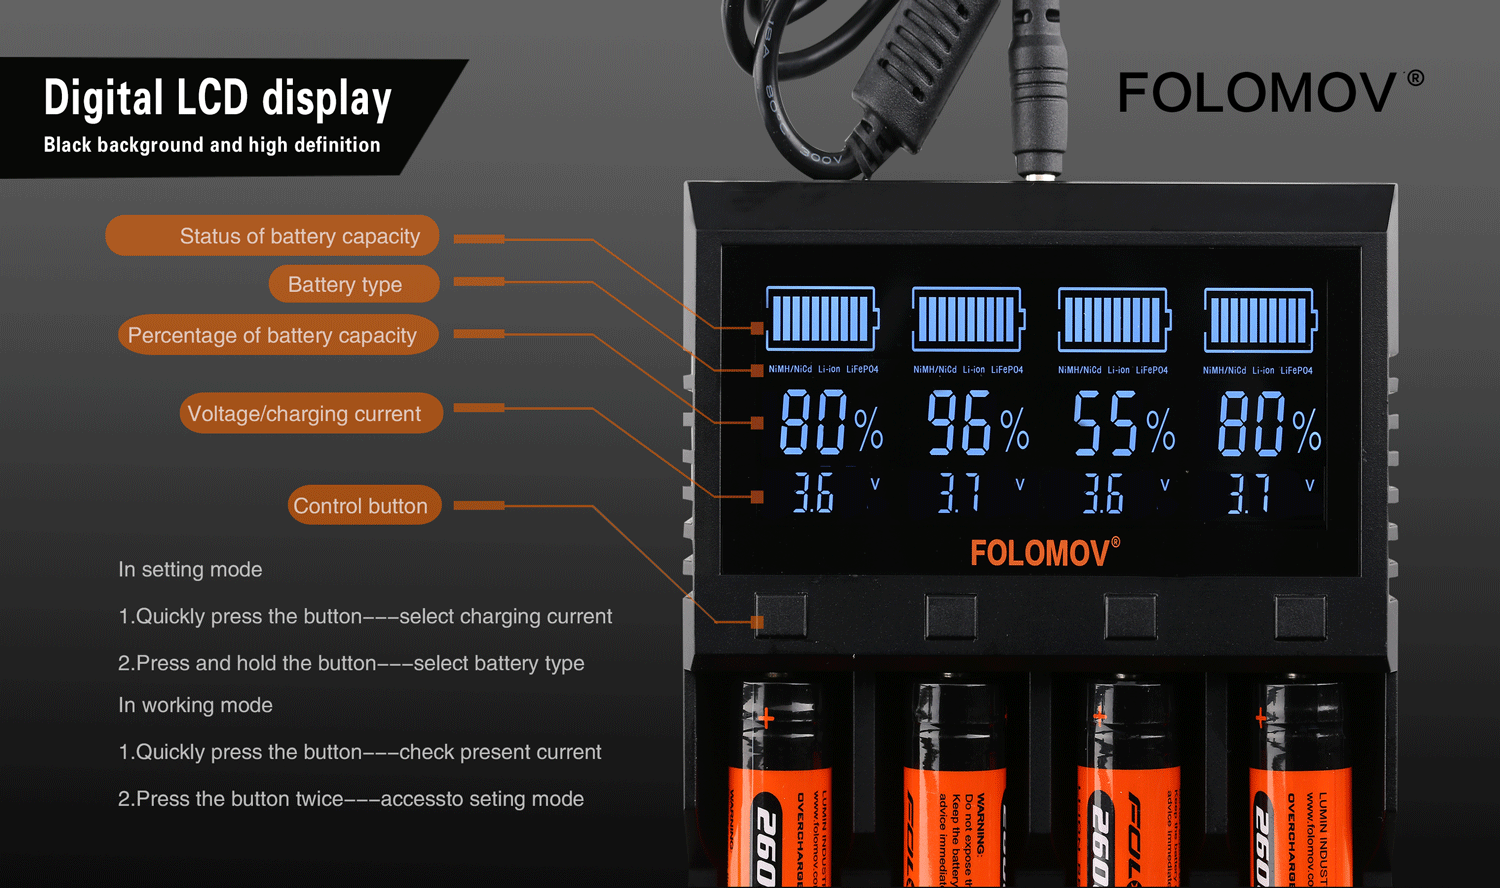 Folomov A4 Smart Quick Charger with LCD Screen Digital LCD display FOLOMOV Black background and high definition Status of battery capacity Battery type Percentage of battery capacity m   NiMH NiCd Li ion LiFeP04 NiMH NiCd Li ion LiFeP04 NiMH NiCd Li ion LiFe P04 Voltage charging current  95 55 8 Control button 37353 FOLOMOV In setting mode 1 Quickly press the button    select charging current 2  Press and hold the button   select battery type In working mode 1 Quickly press the button   check present current 2 Press the button twice   accessto seting mode